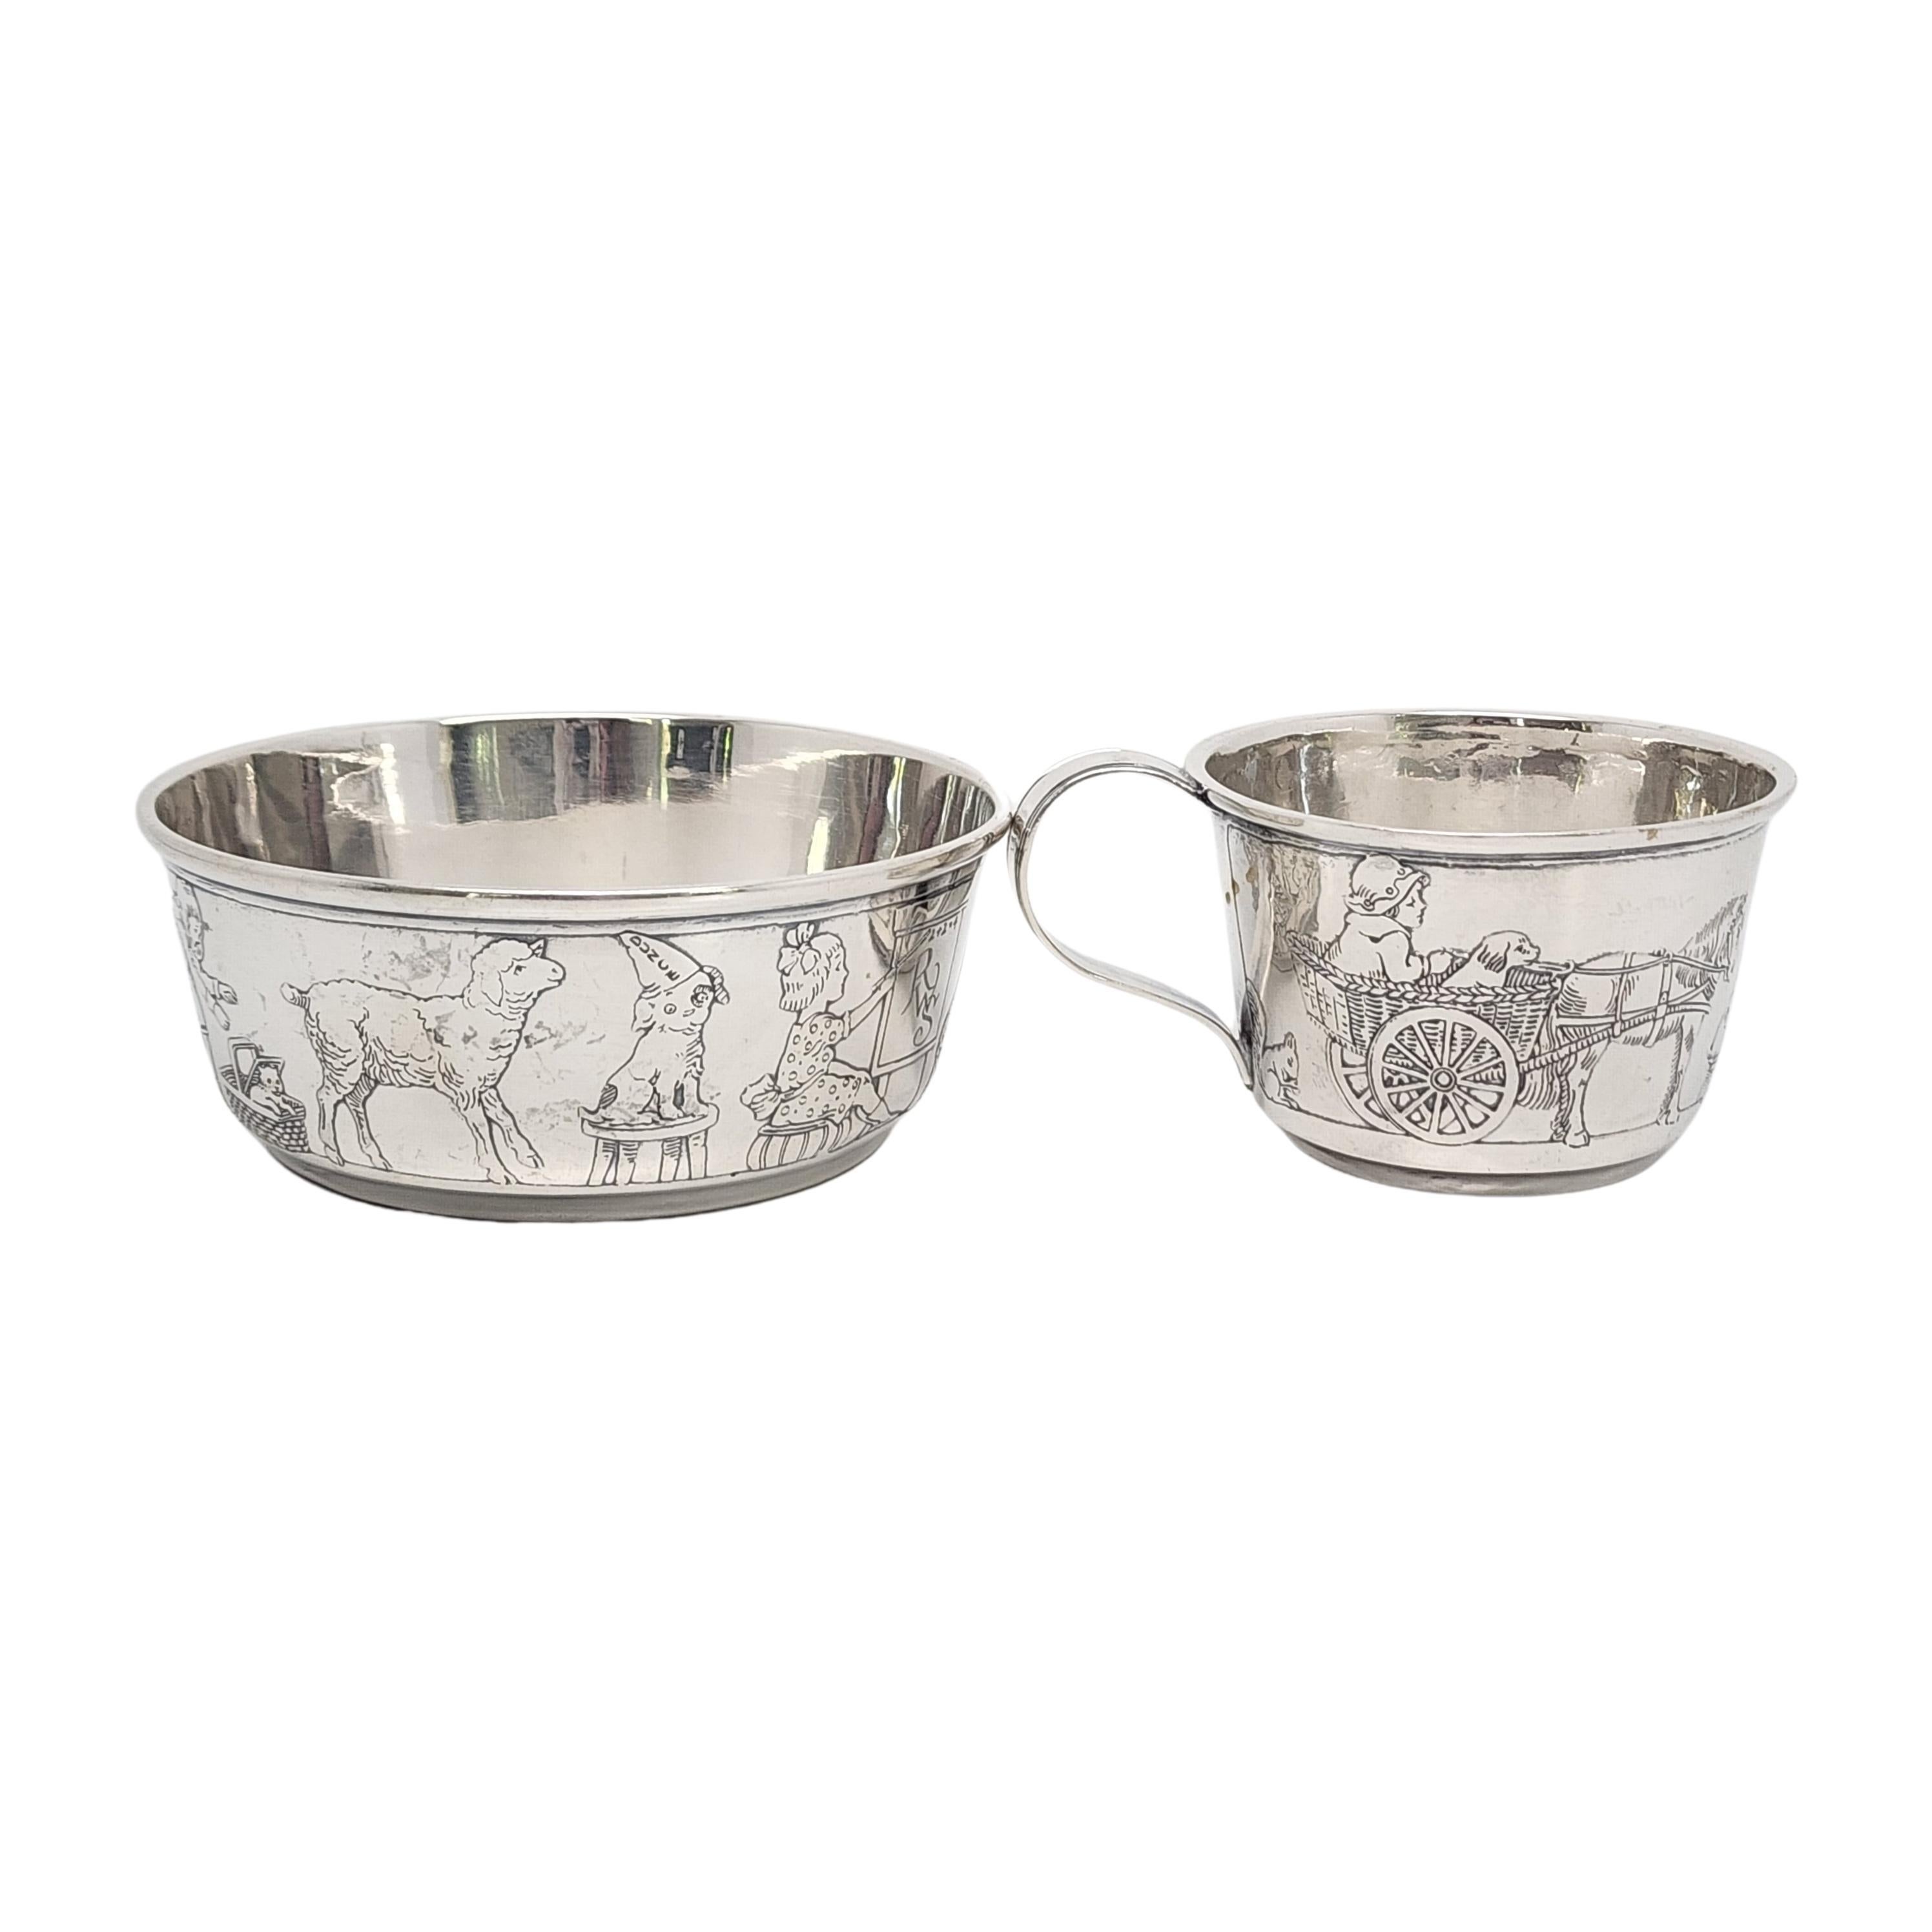 R Blackinton & Co Sterling Silver Child Bowl and Cup w/Mono #15714 In Good Condition For Sale In Washington Depot, CT